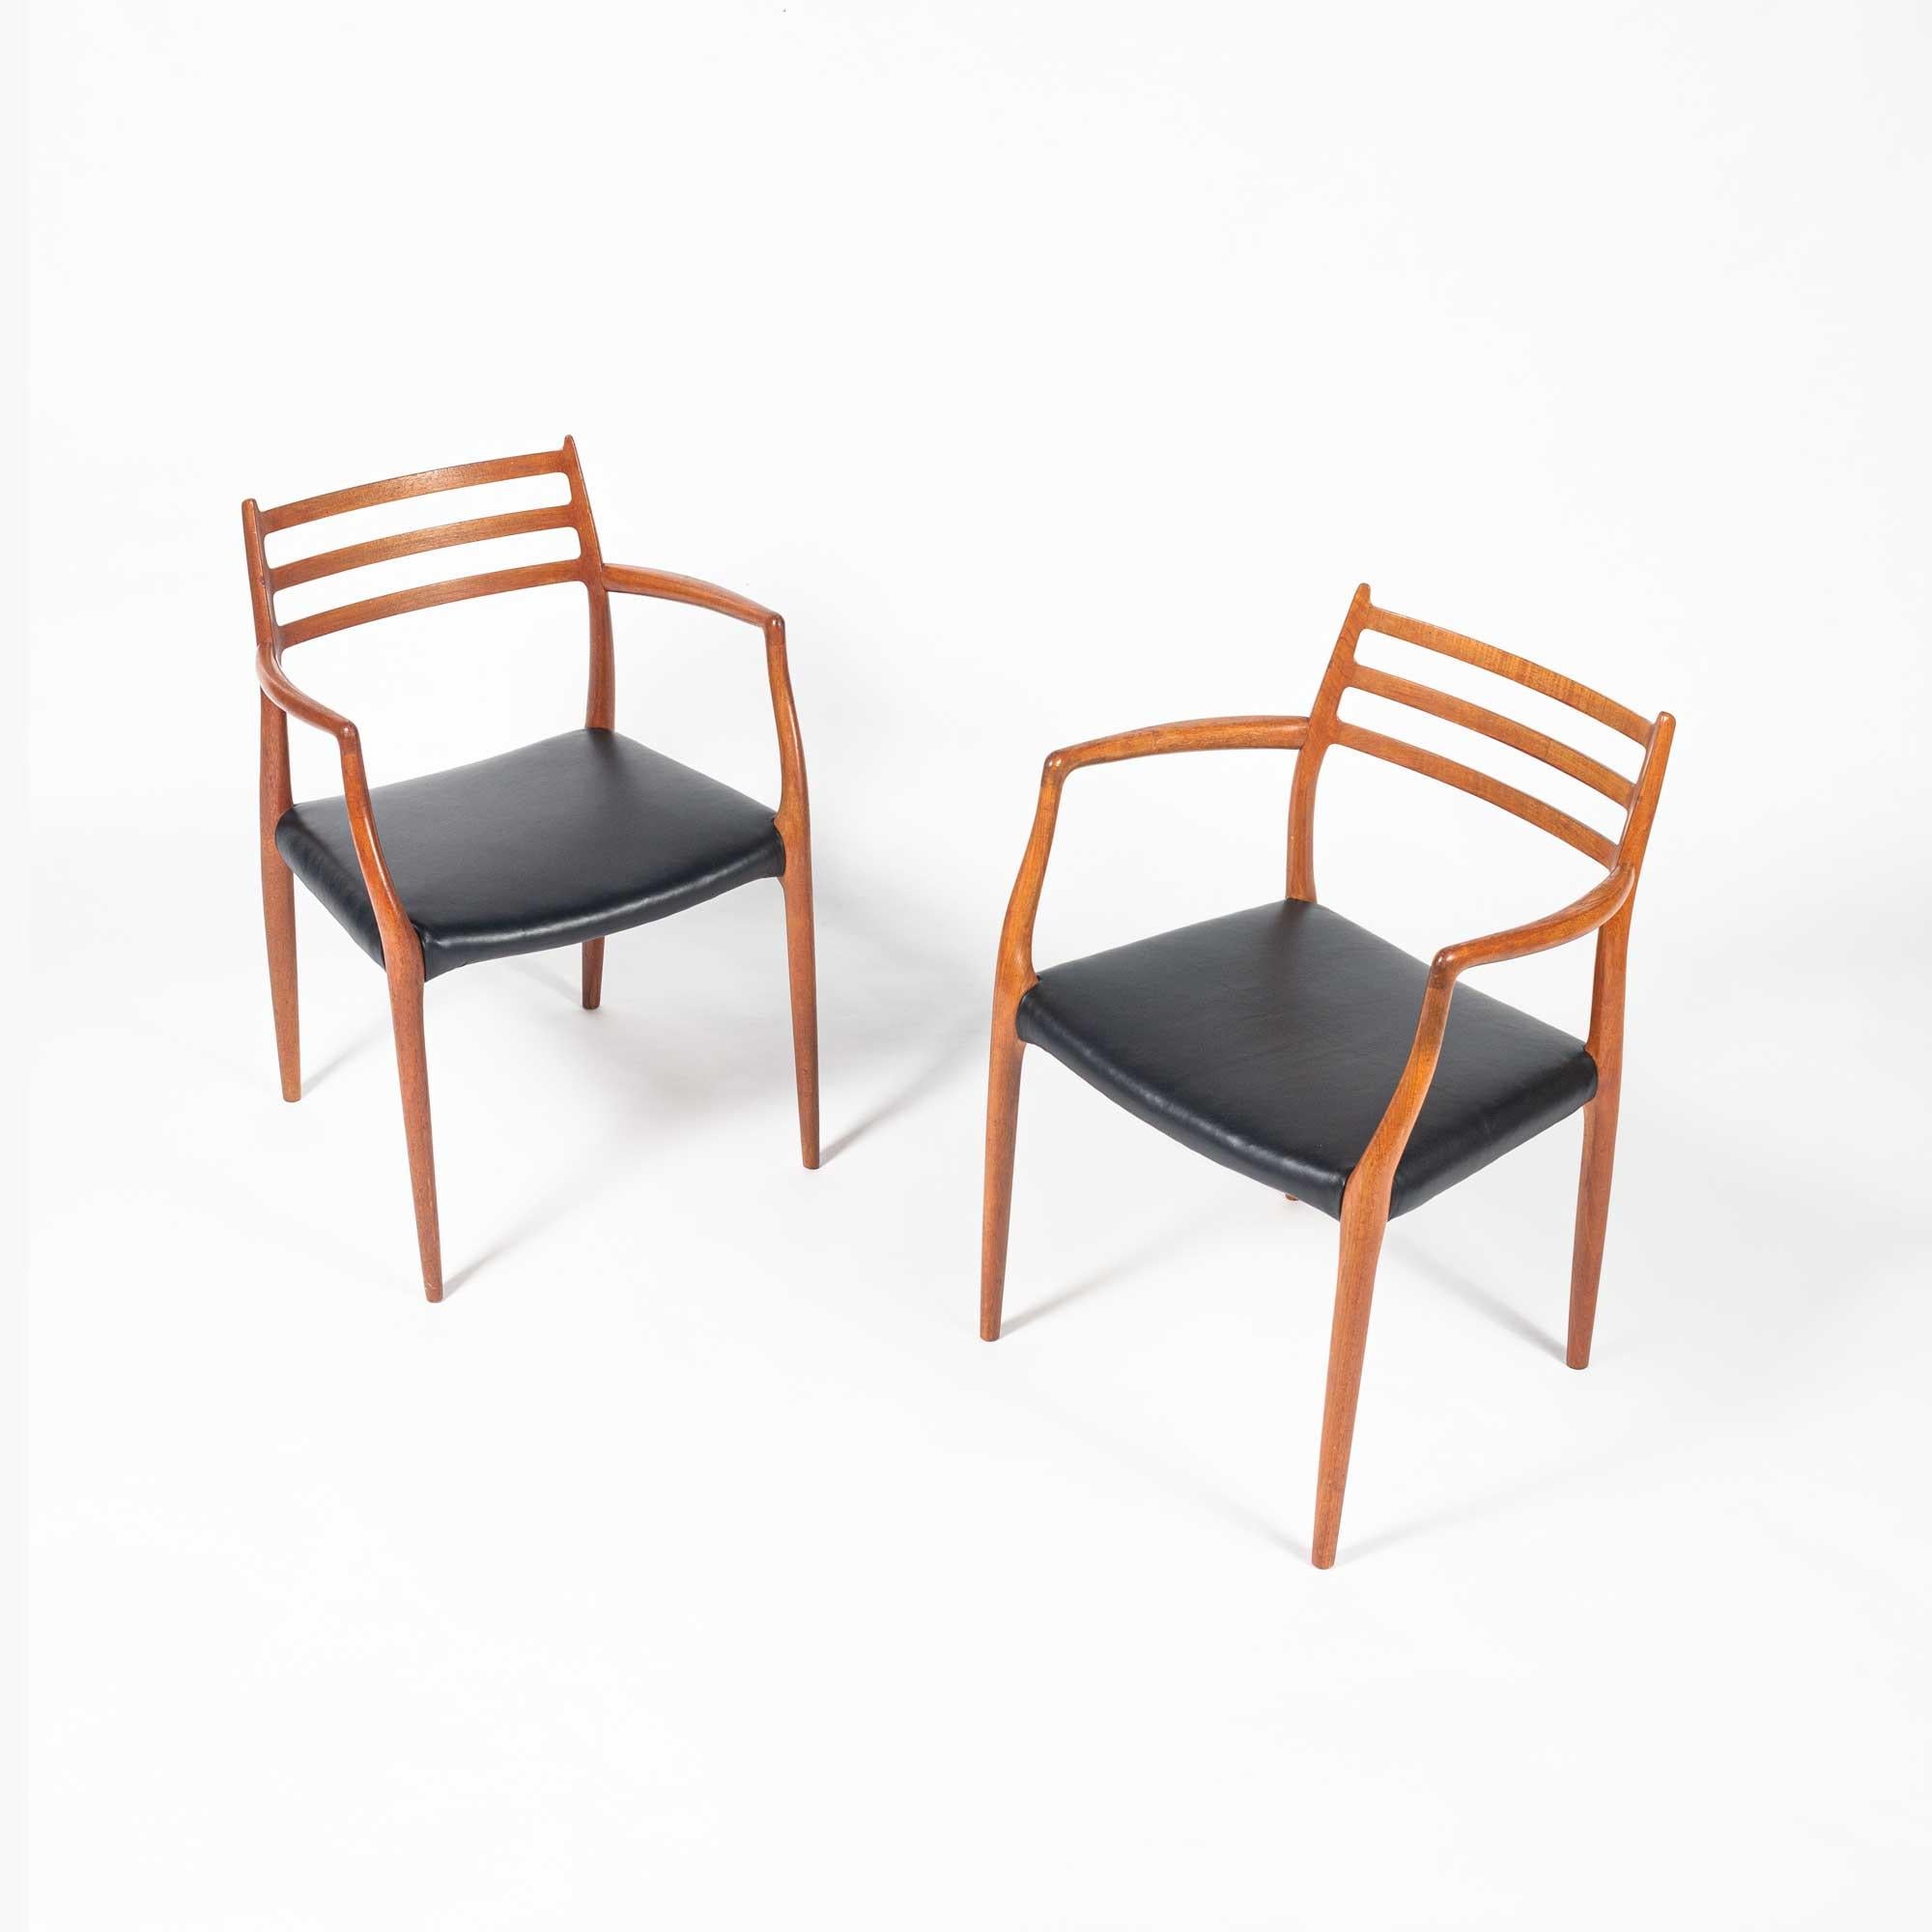 Iconic pair of teak dining/captain chairs designed by Niels Otto Moller for JL Møller Møbelfabrikin 1954, Moller 62. Frame is in vintage condition, with newly reupholstered black leather seats.